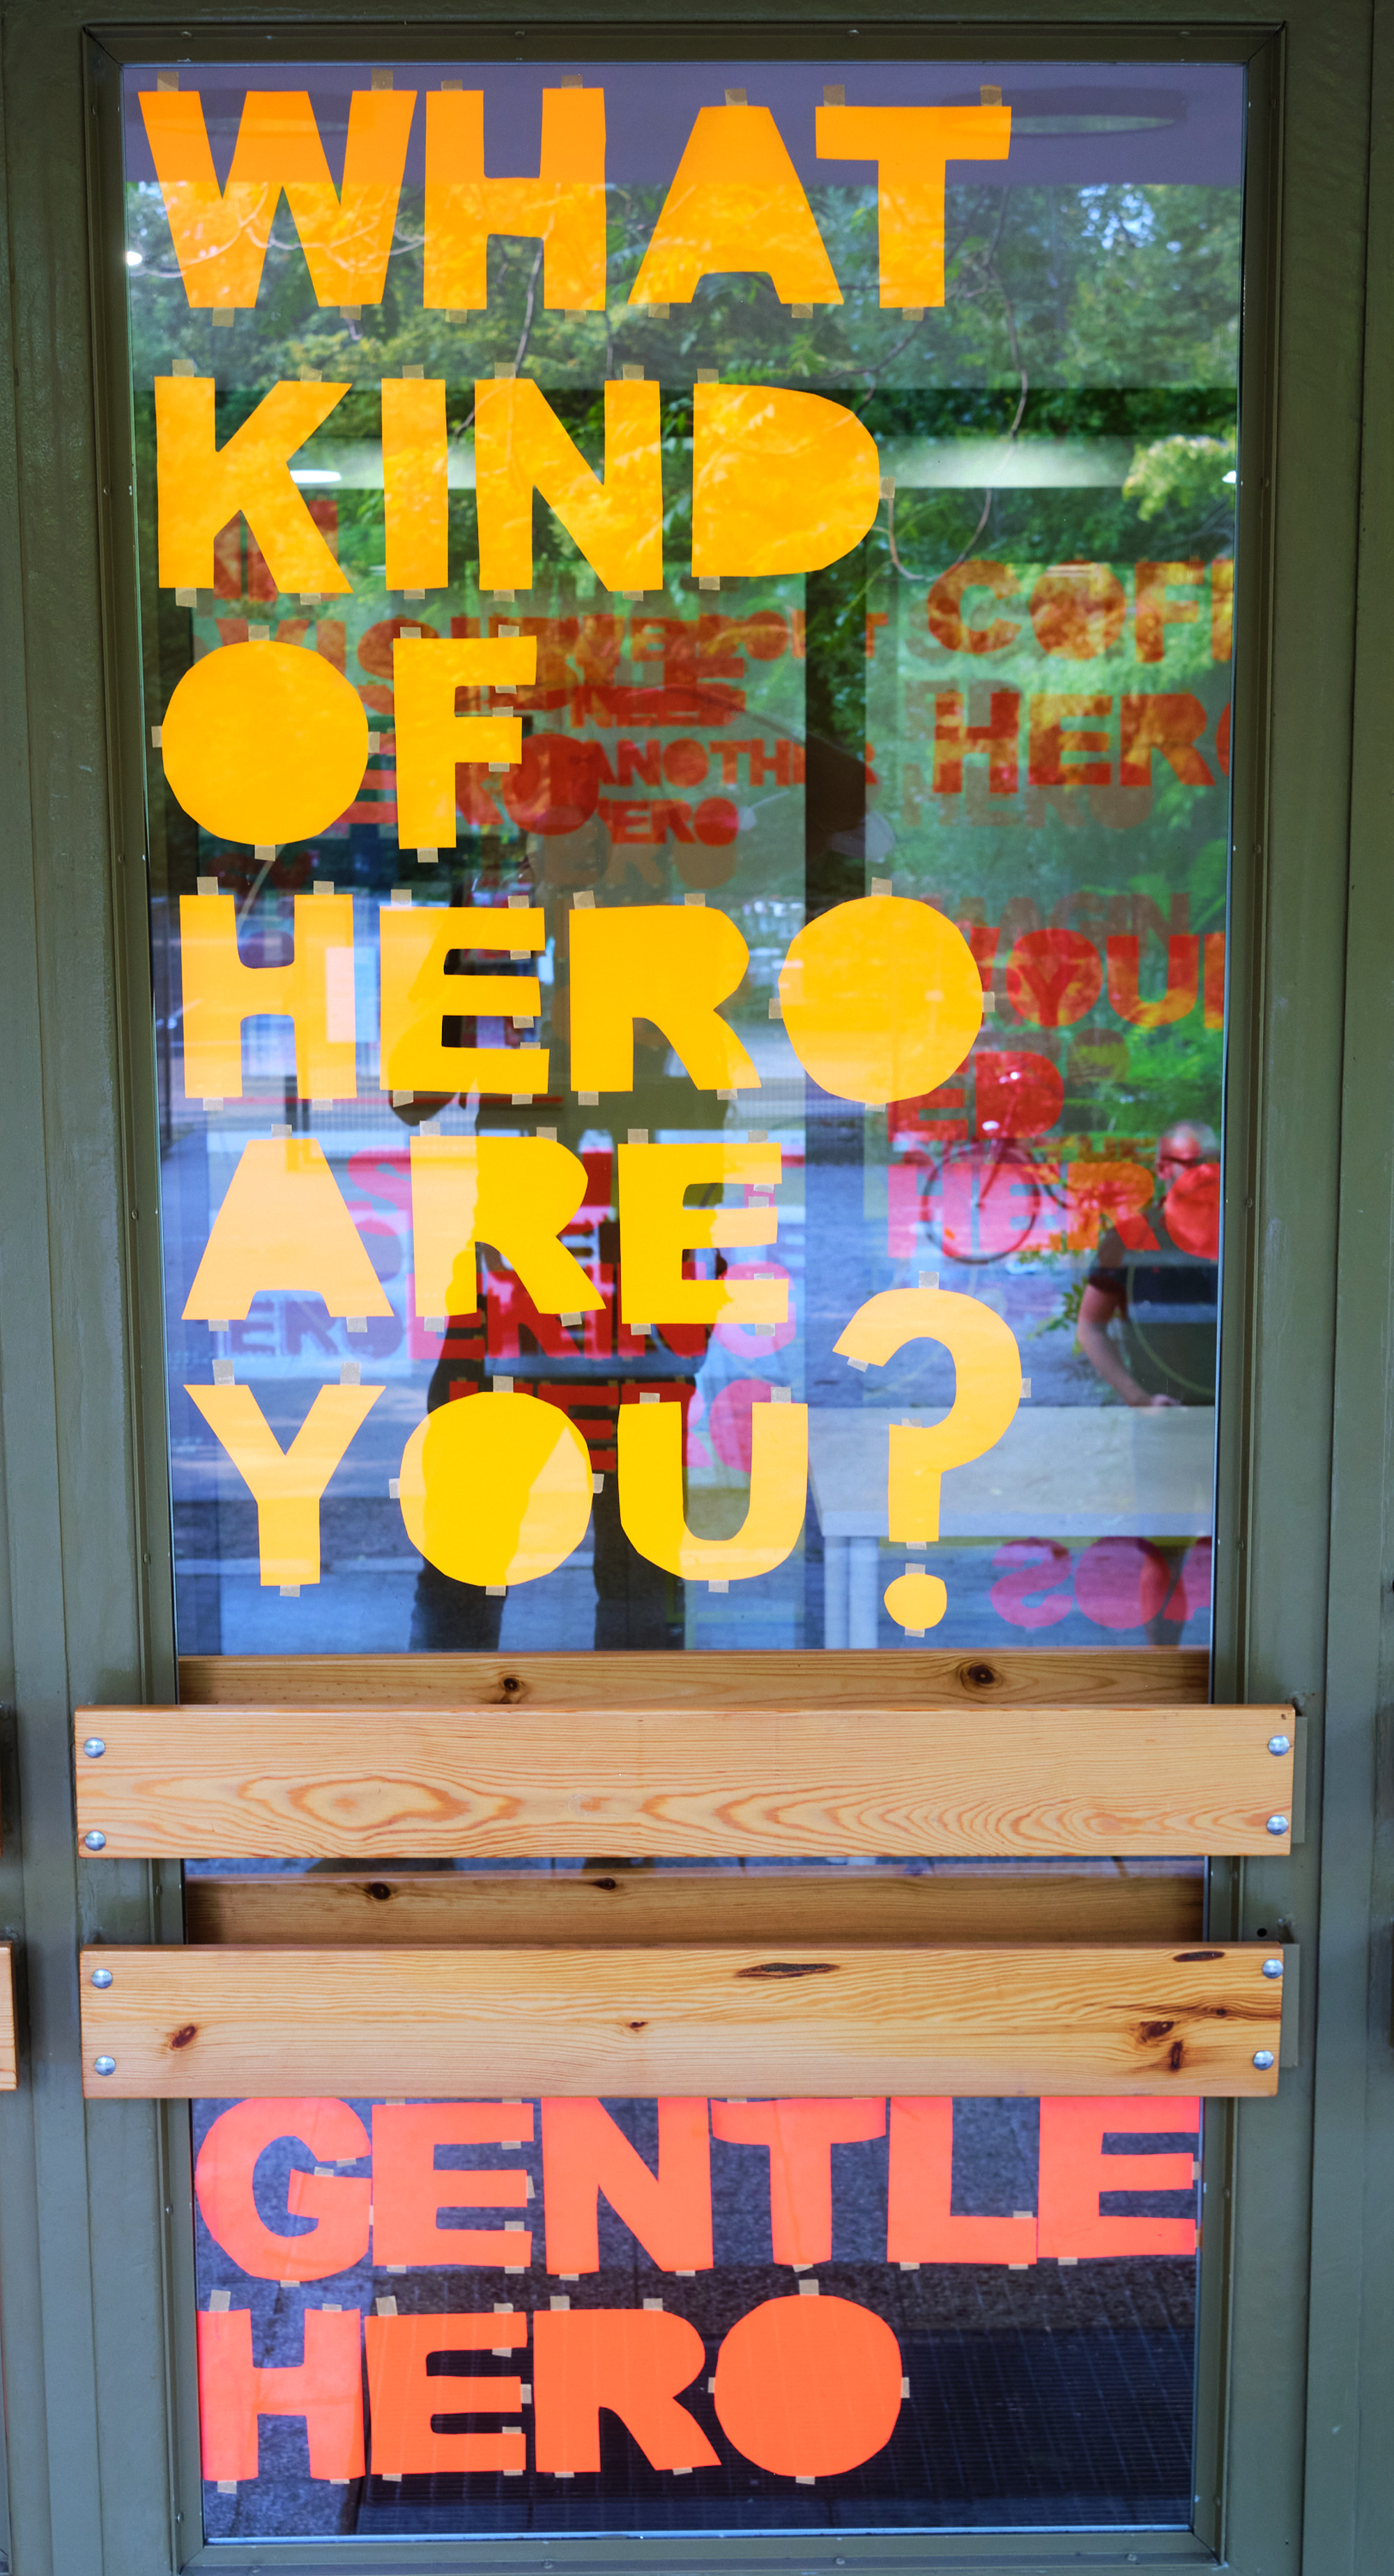 Lettering stuck to a glass door “What kind of Hero are you?”